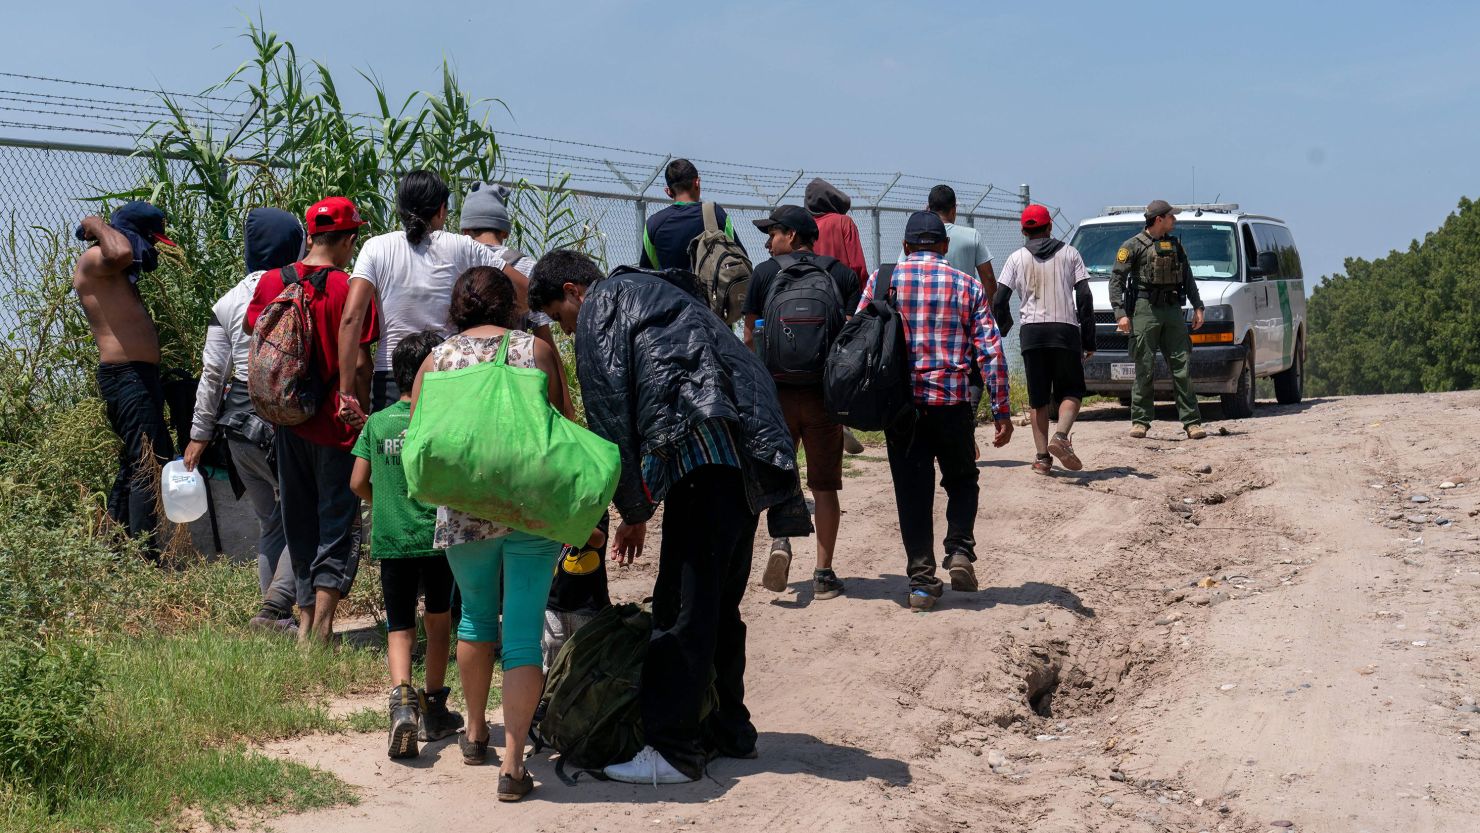 A group of migrants who have crossed into the US from Mexico seen in Eagle Pass, Texas, on August 25.